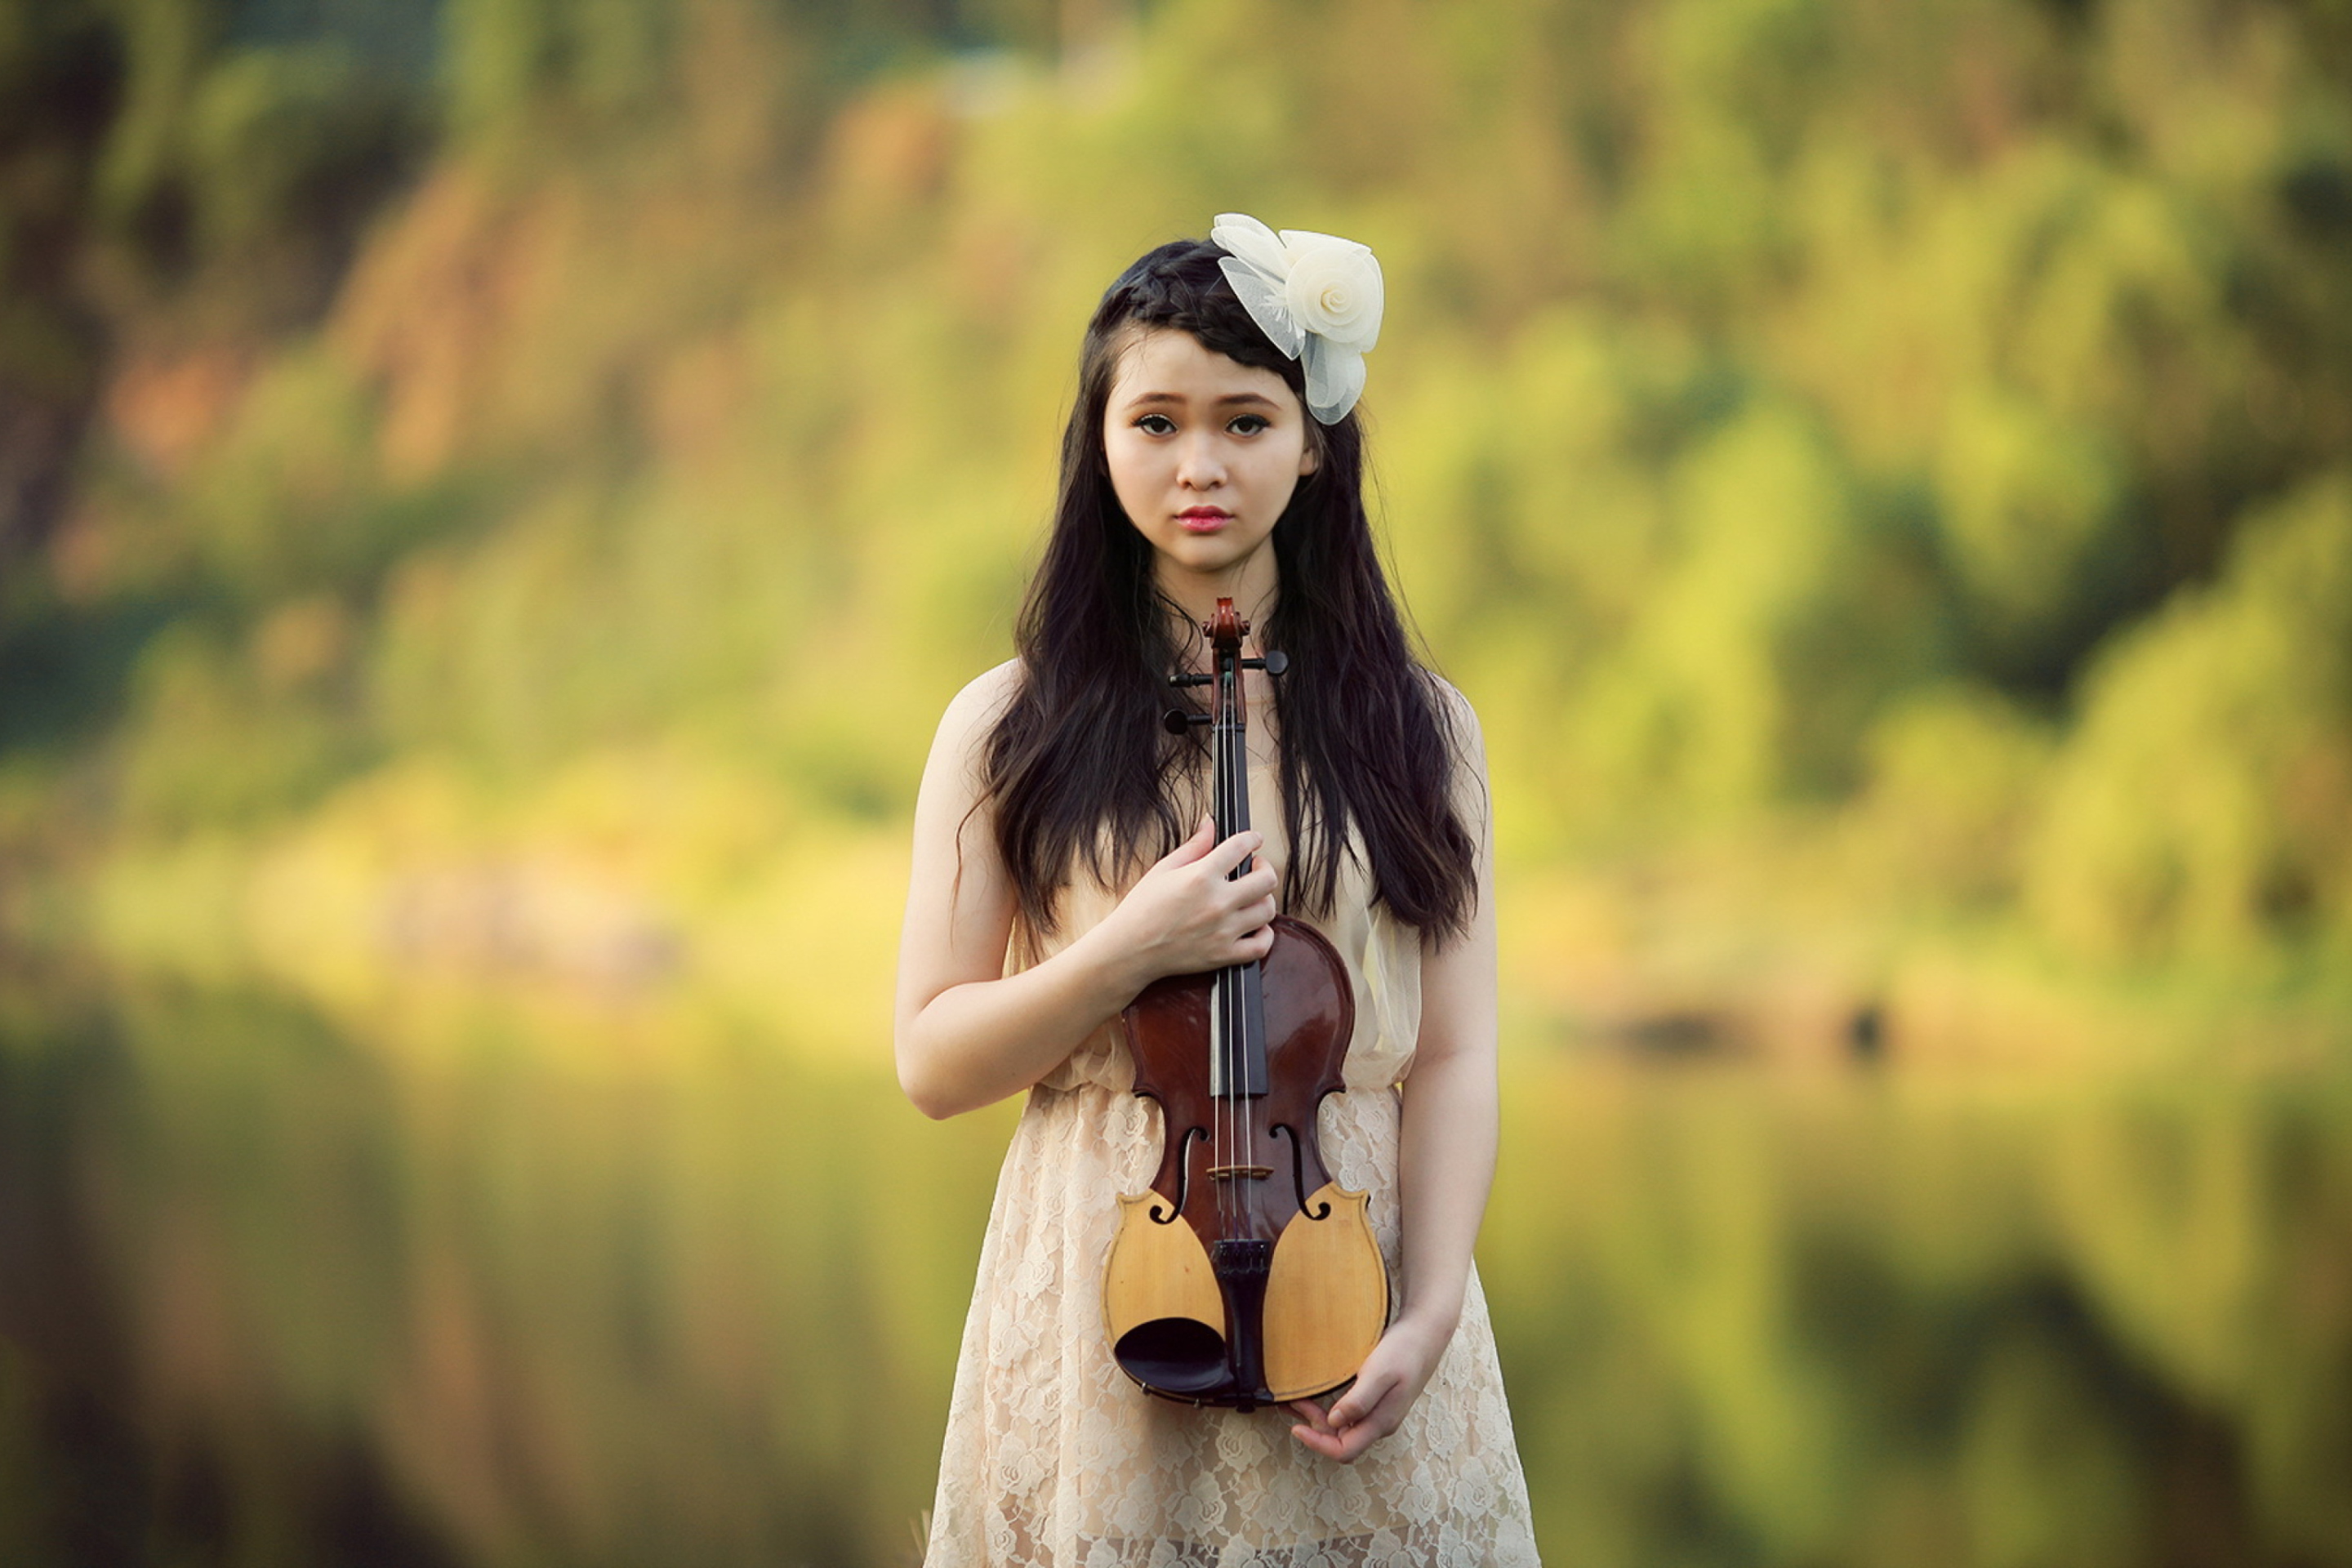 Girl With Violin wallpaper 2880x1920